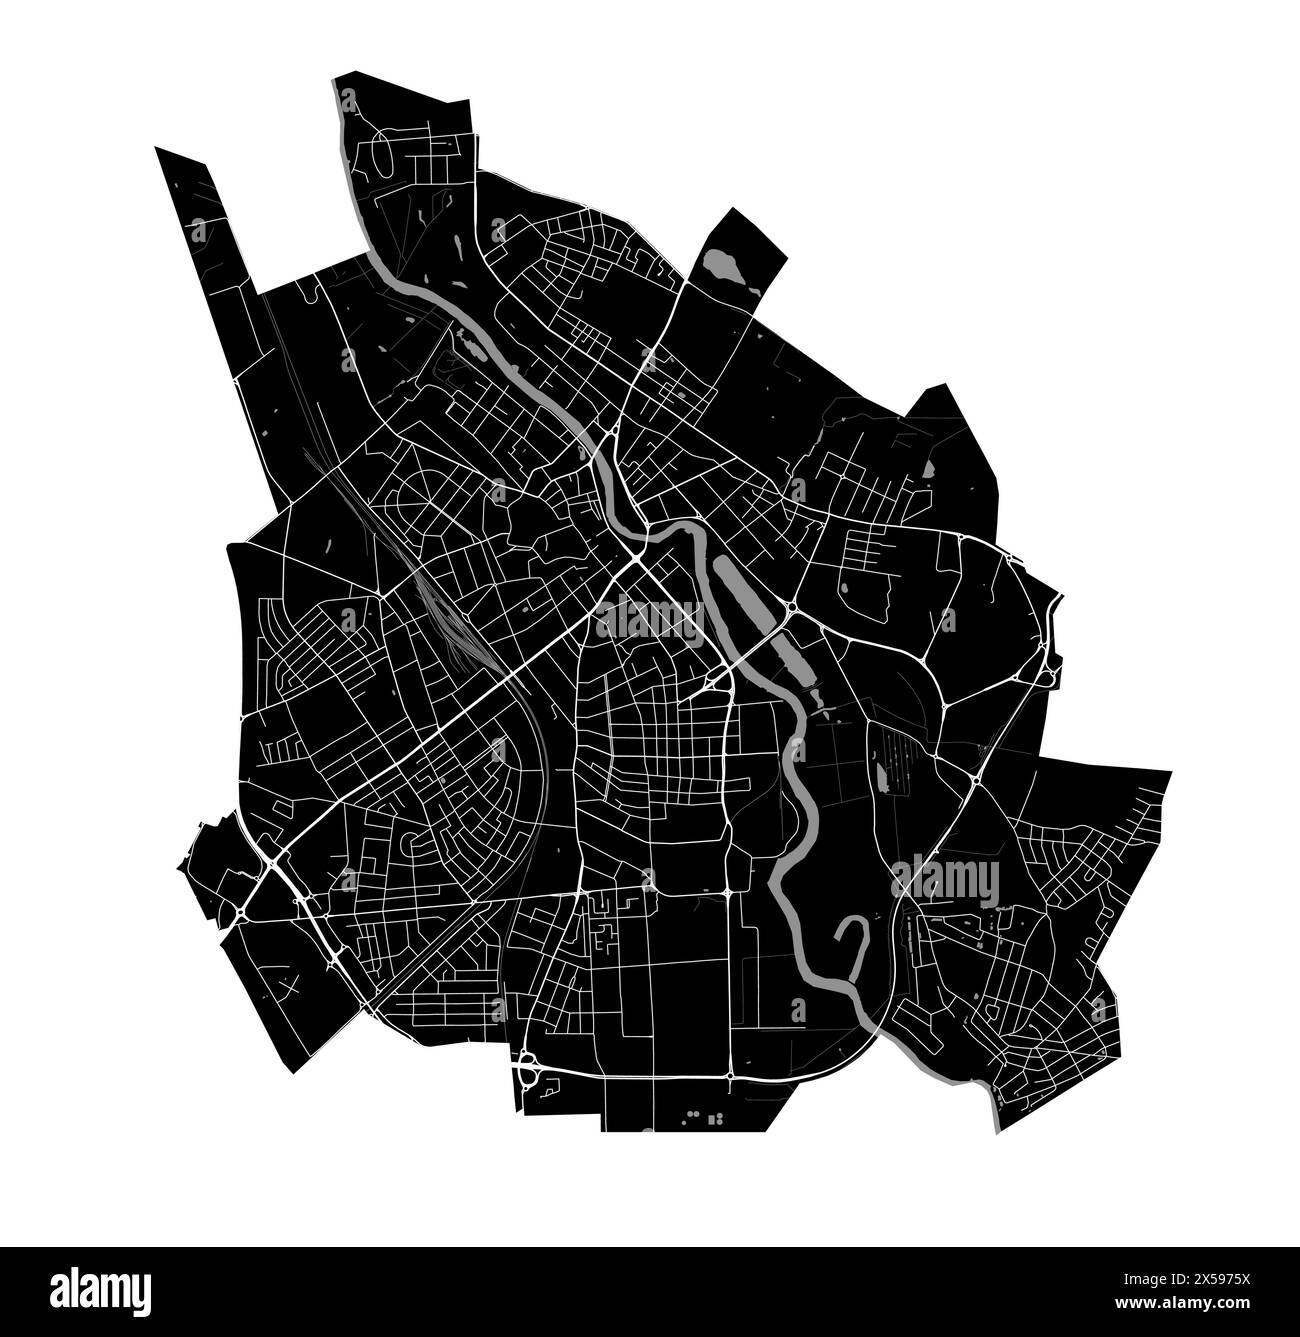 Map of Tartu, Estonia. Detailed city vector map, metropolitan area with border. Black and white streetmap with roads and water. Stock Vector